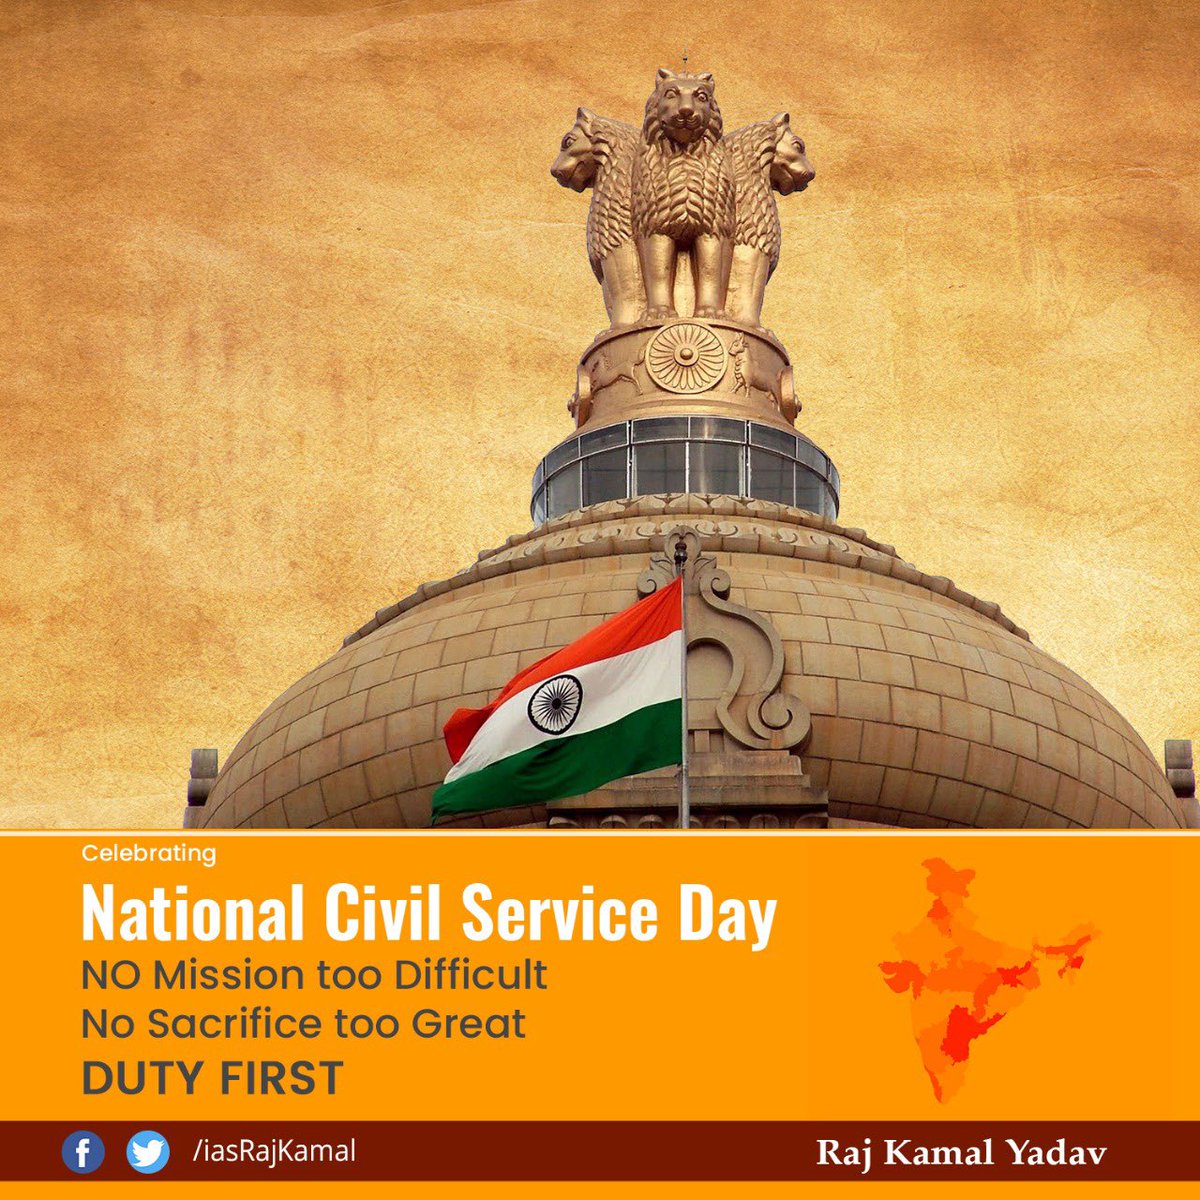 DUTY First
#nationalcivilserviceday